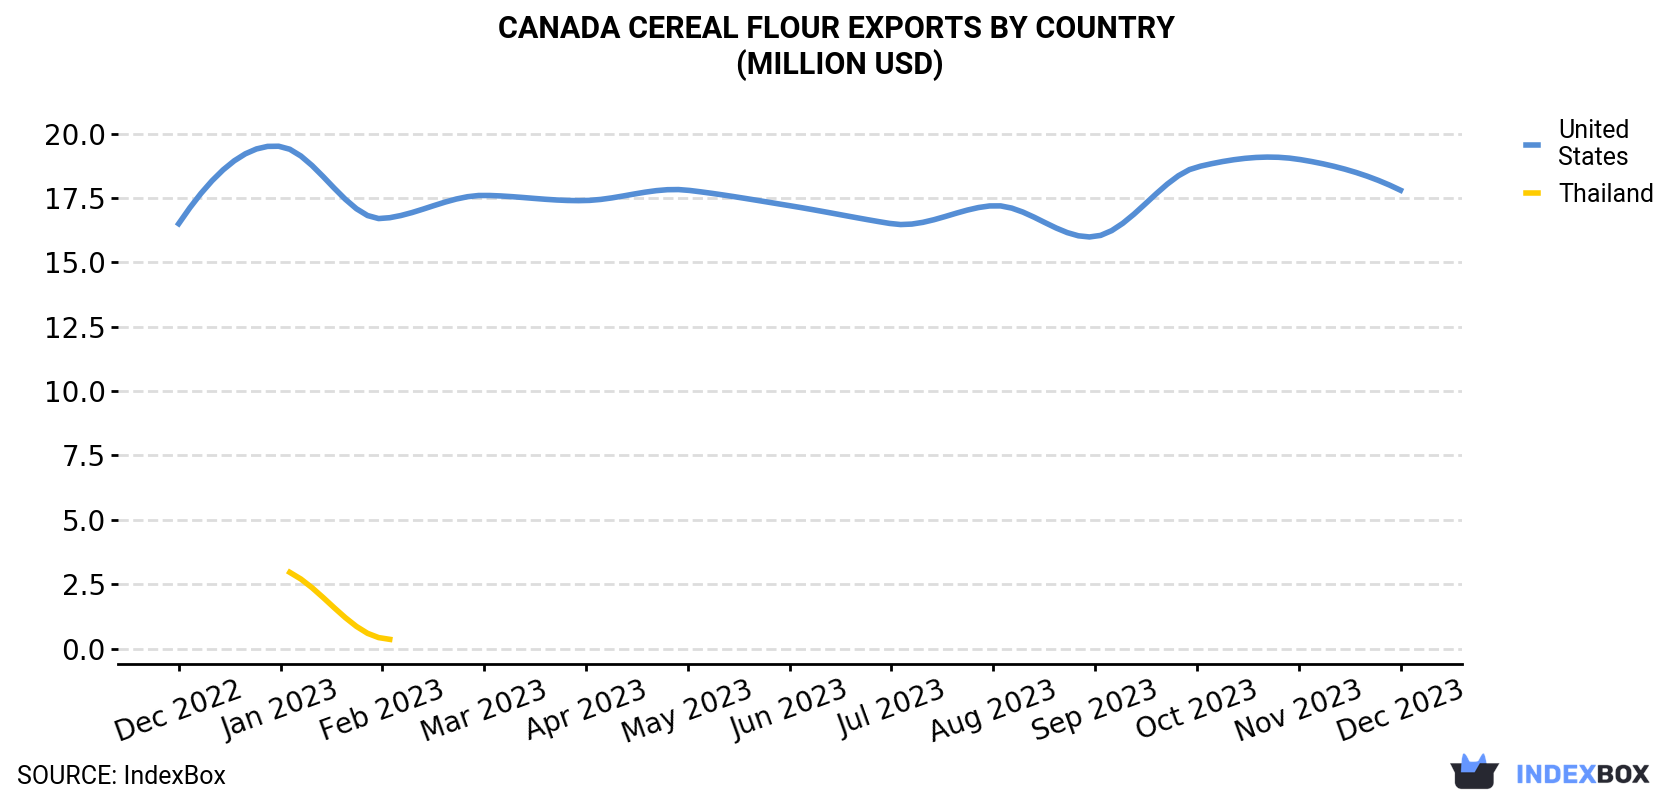 Canada Cereal Flour Exports By Country (Million USD)